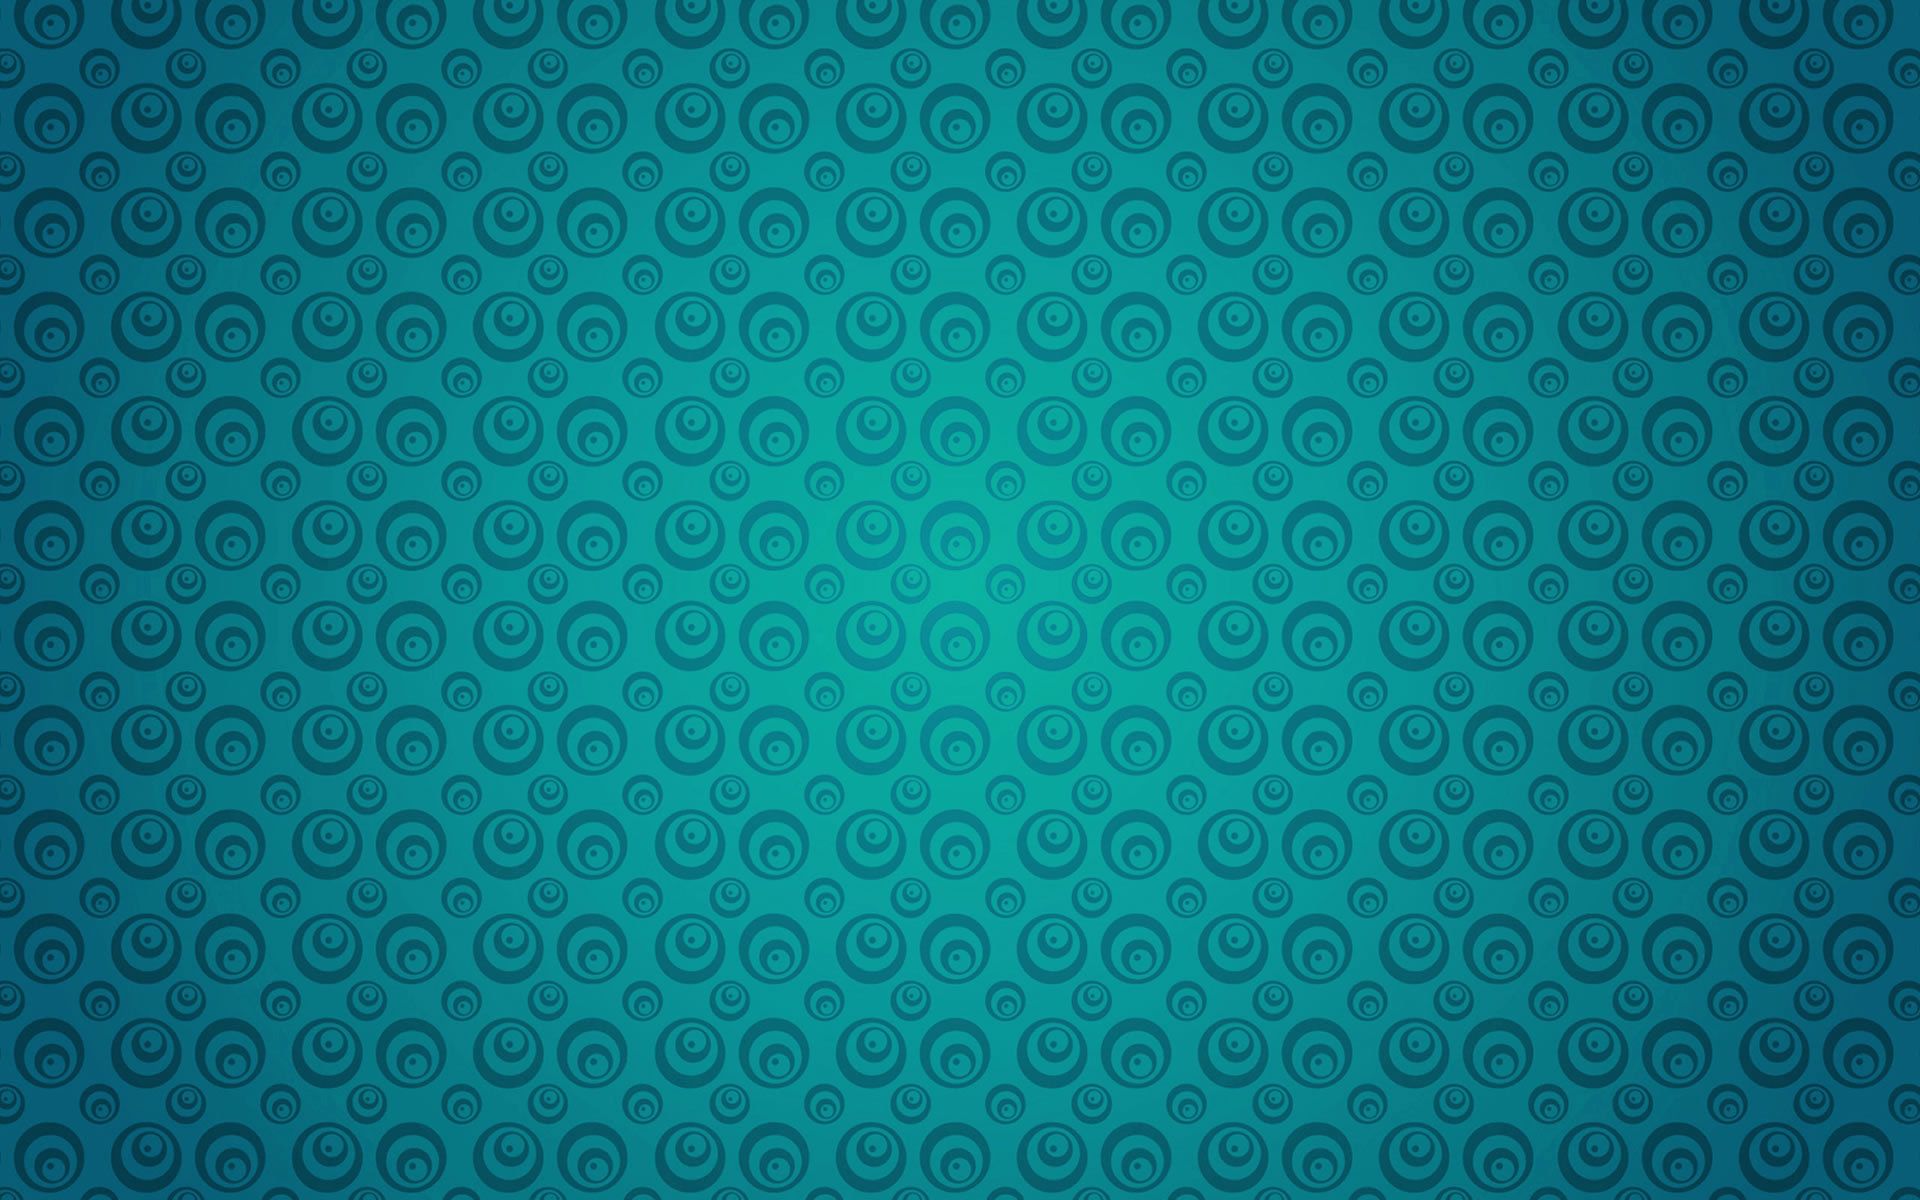 patterns, turquoise, circles, texture, textures, surface